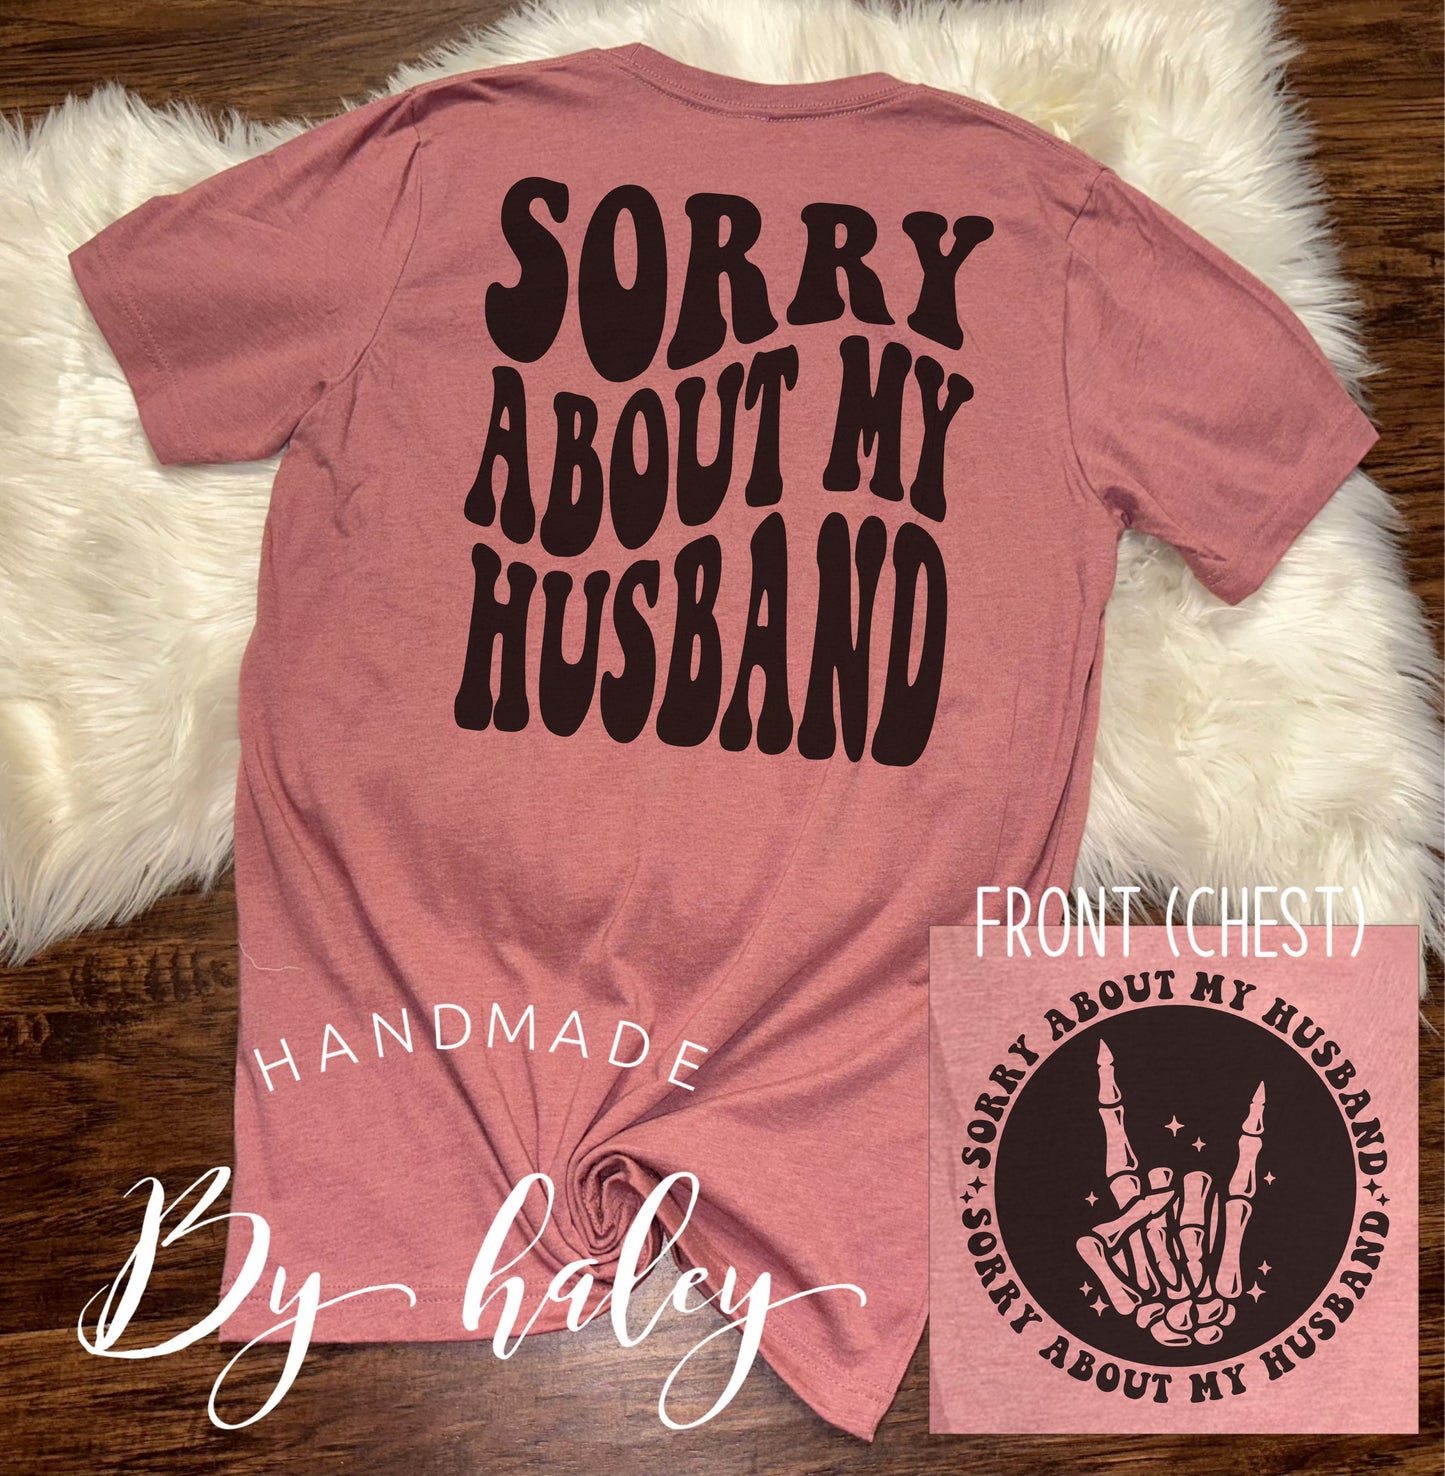 Sorry About My Husband T-Shirt